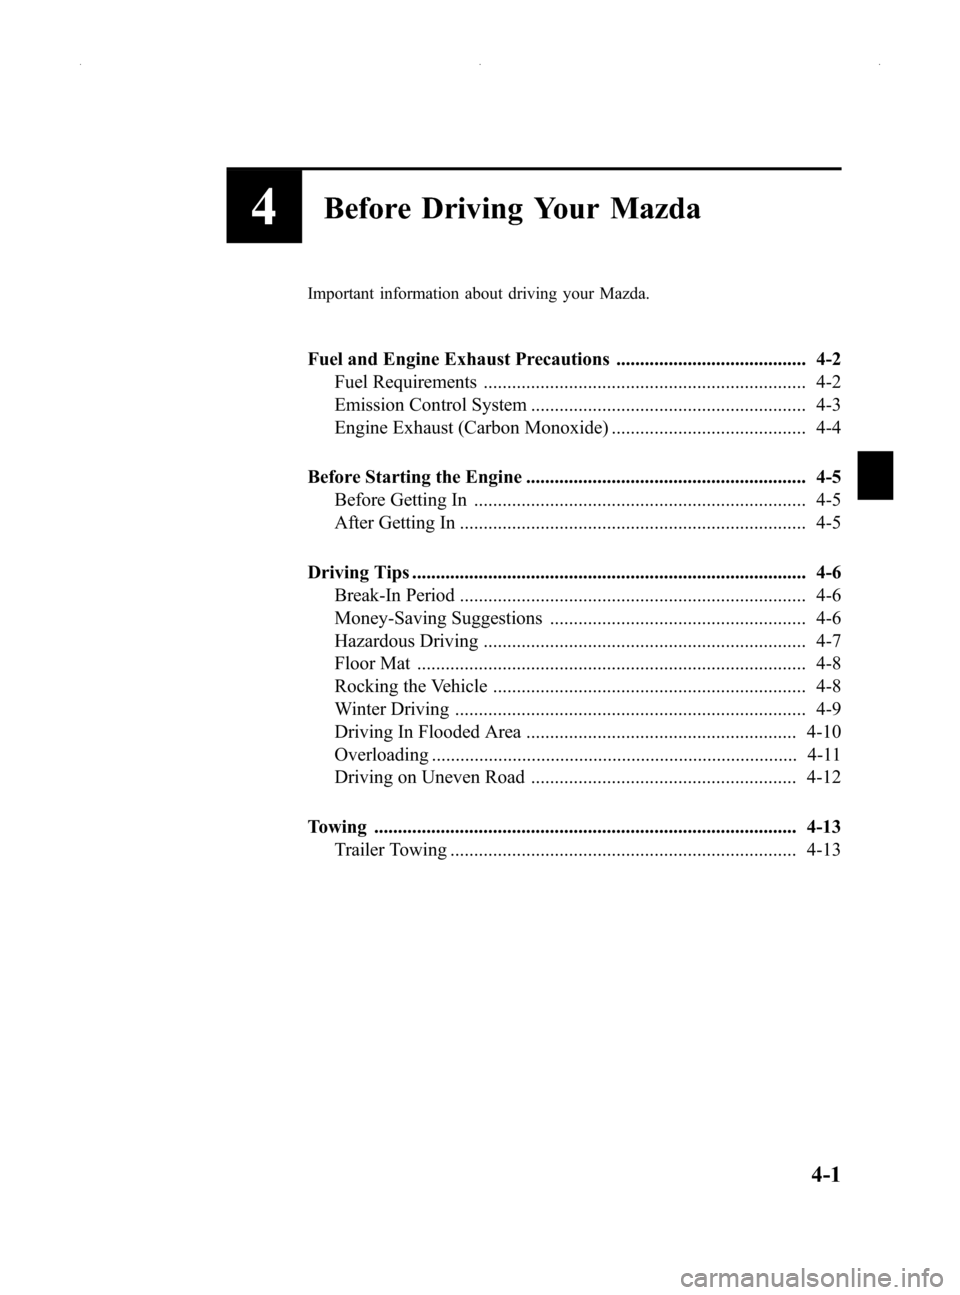 MAZDA MODEL MX-5 2014  Owners Manual (in English) Black plate (131,1)
4Before Driving Your Mazda
Important information about driving your Mazda.
Fuel and Engine Exhaust Precautions ........................................ 4-2Fuel Requirements .......